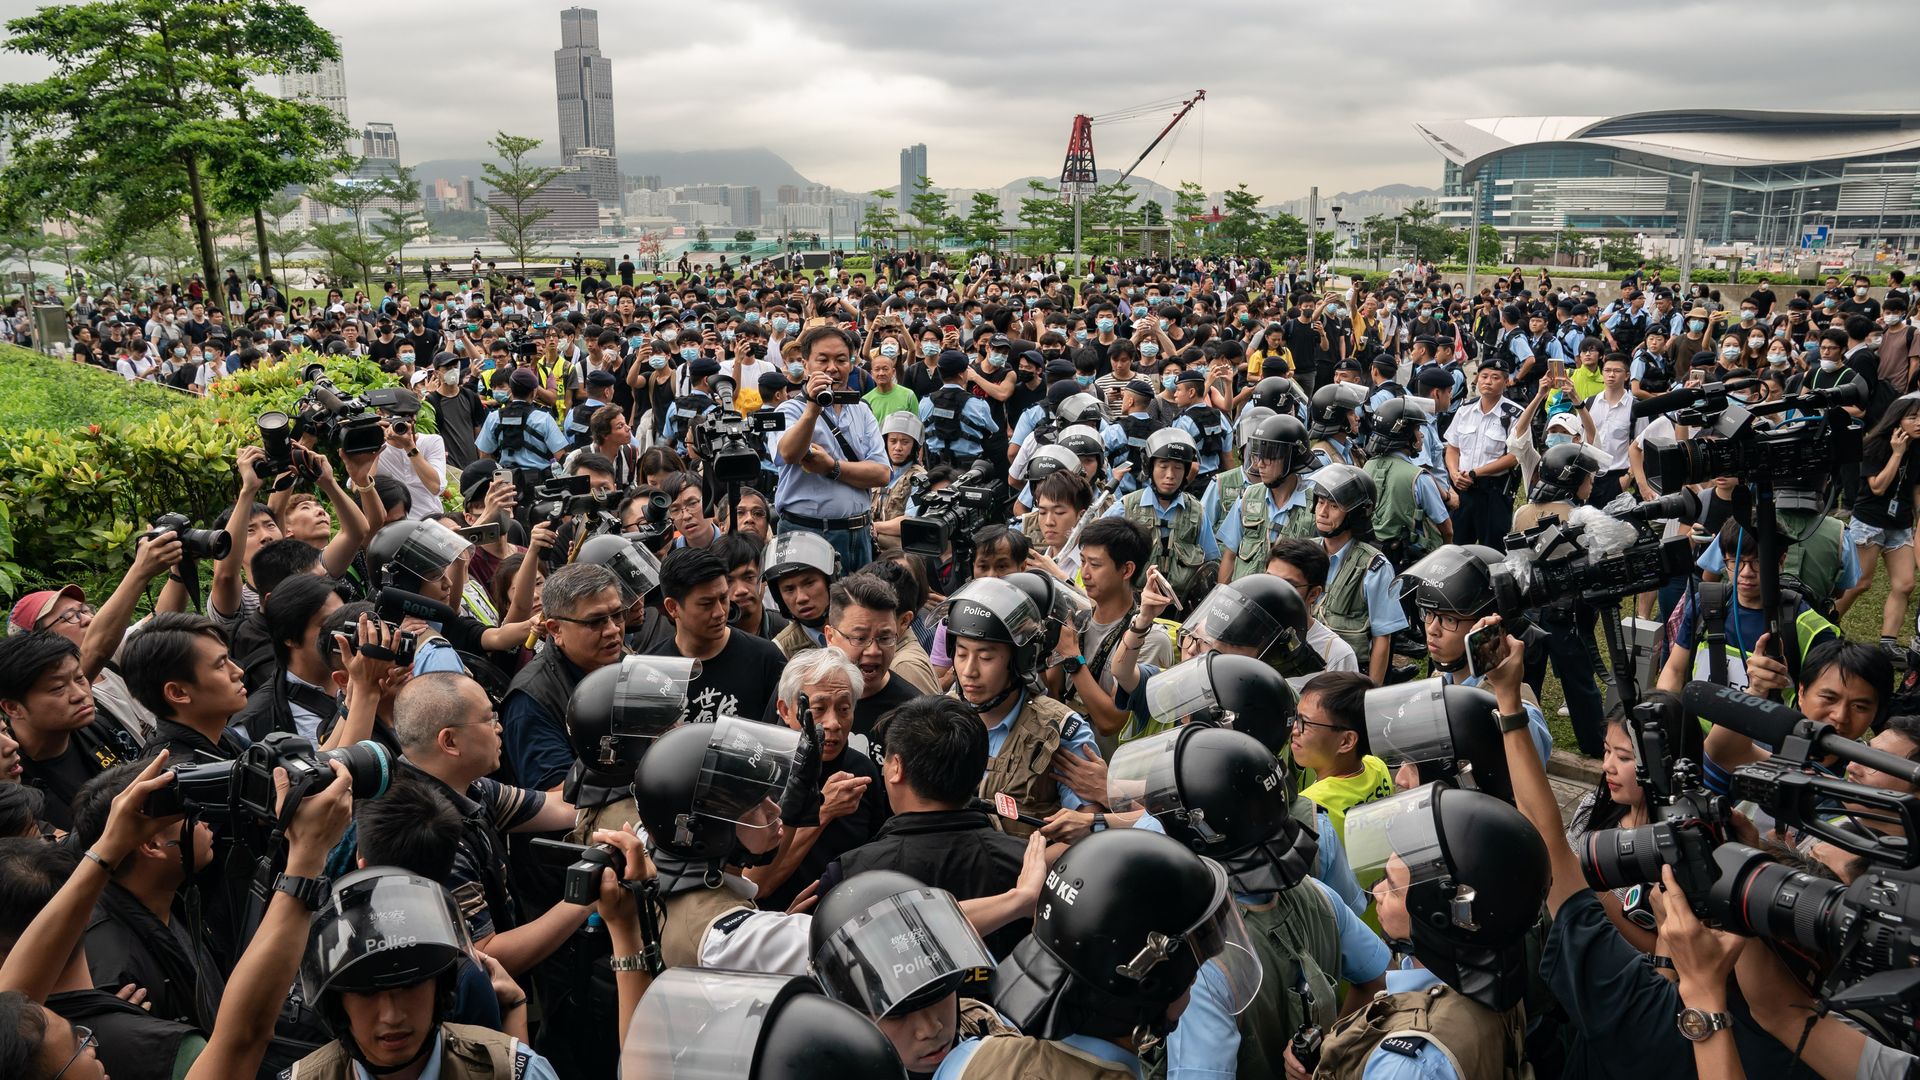 esidents argue with police officers at the Tamar Park outside the Central Government Complex on June 13, 2019 in Hong Kong.